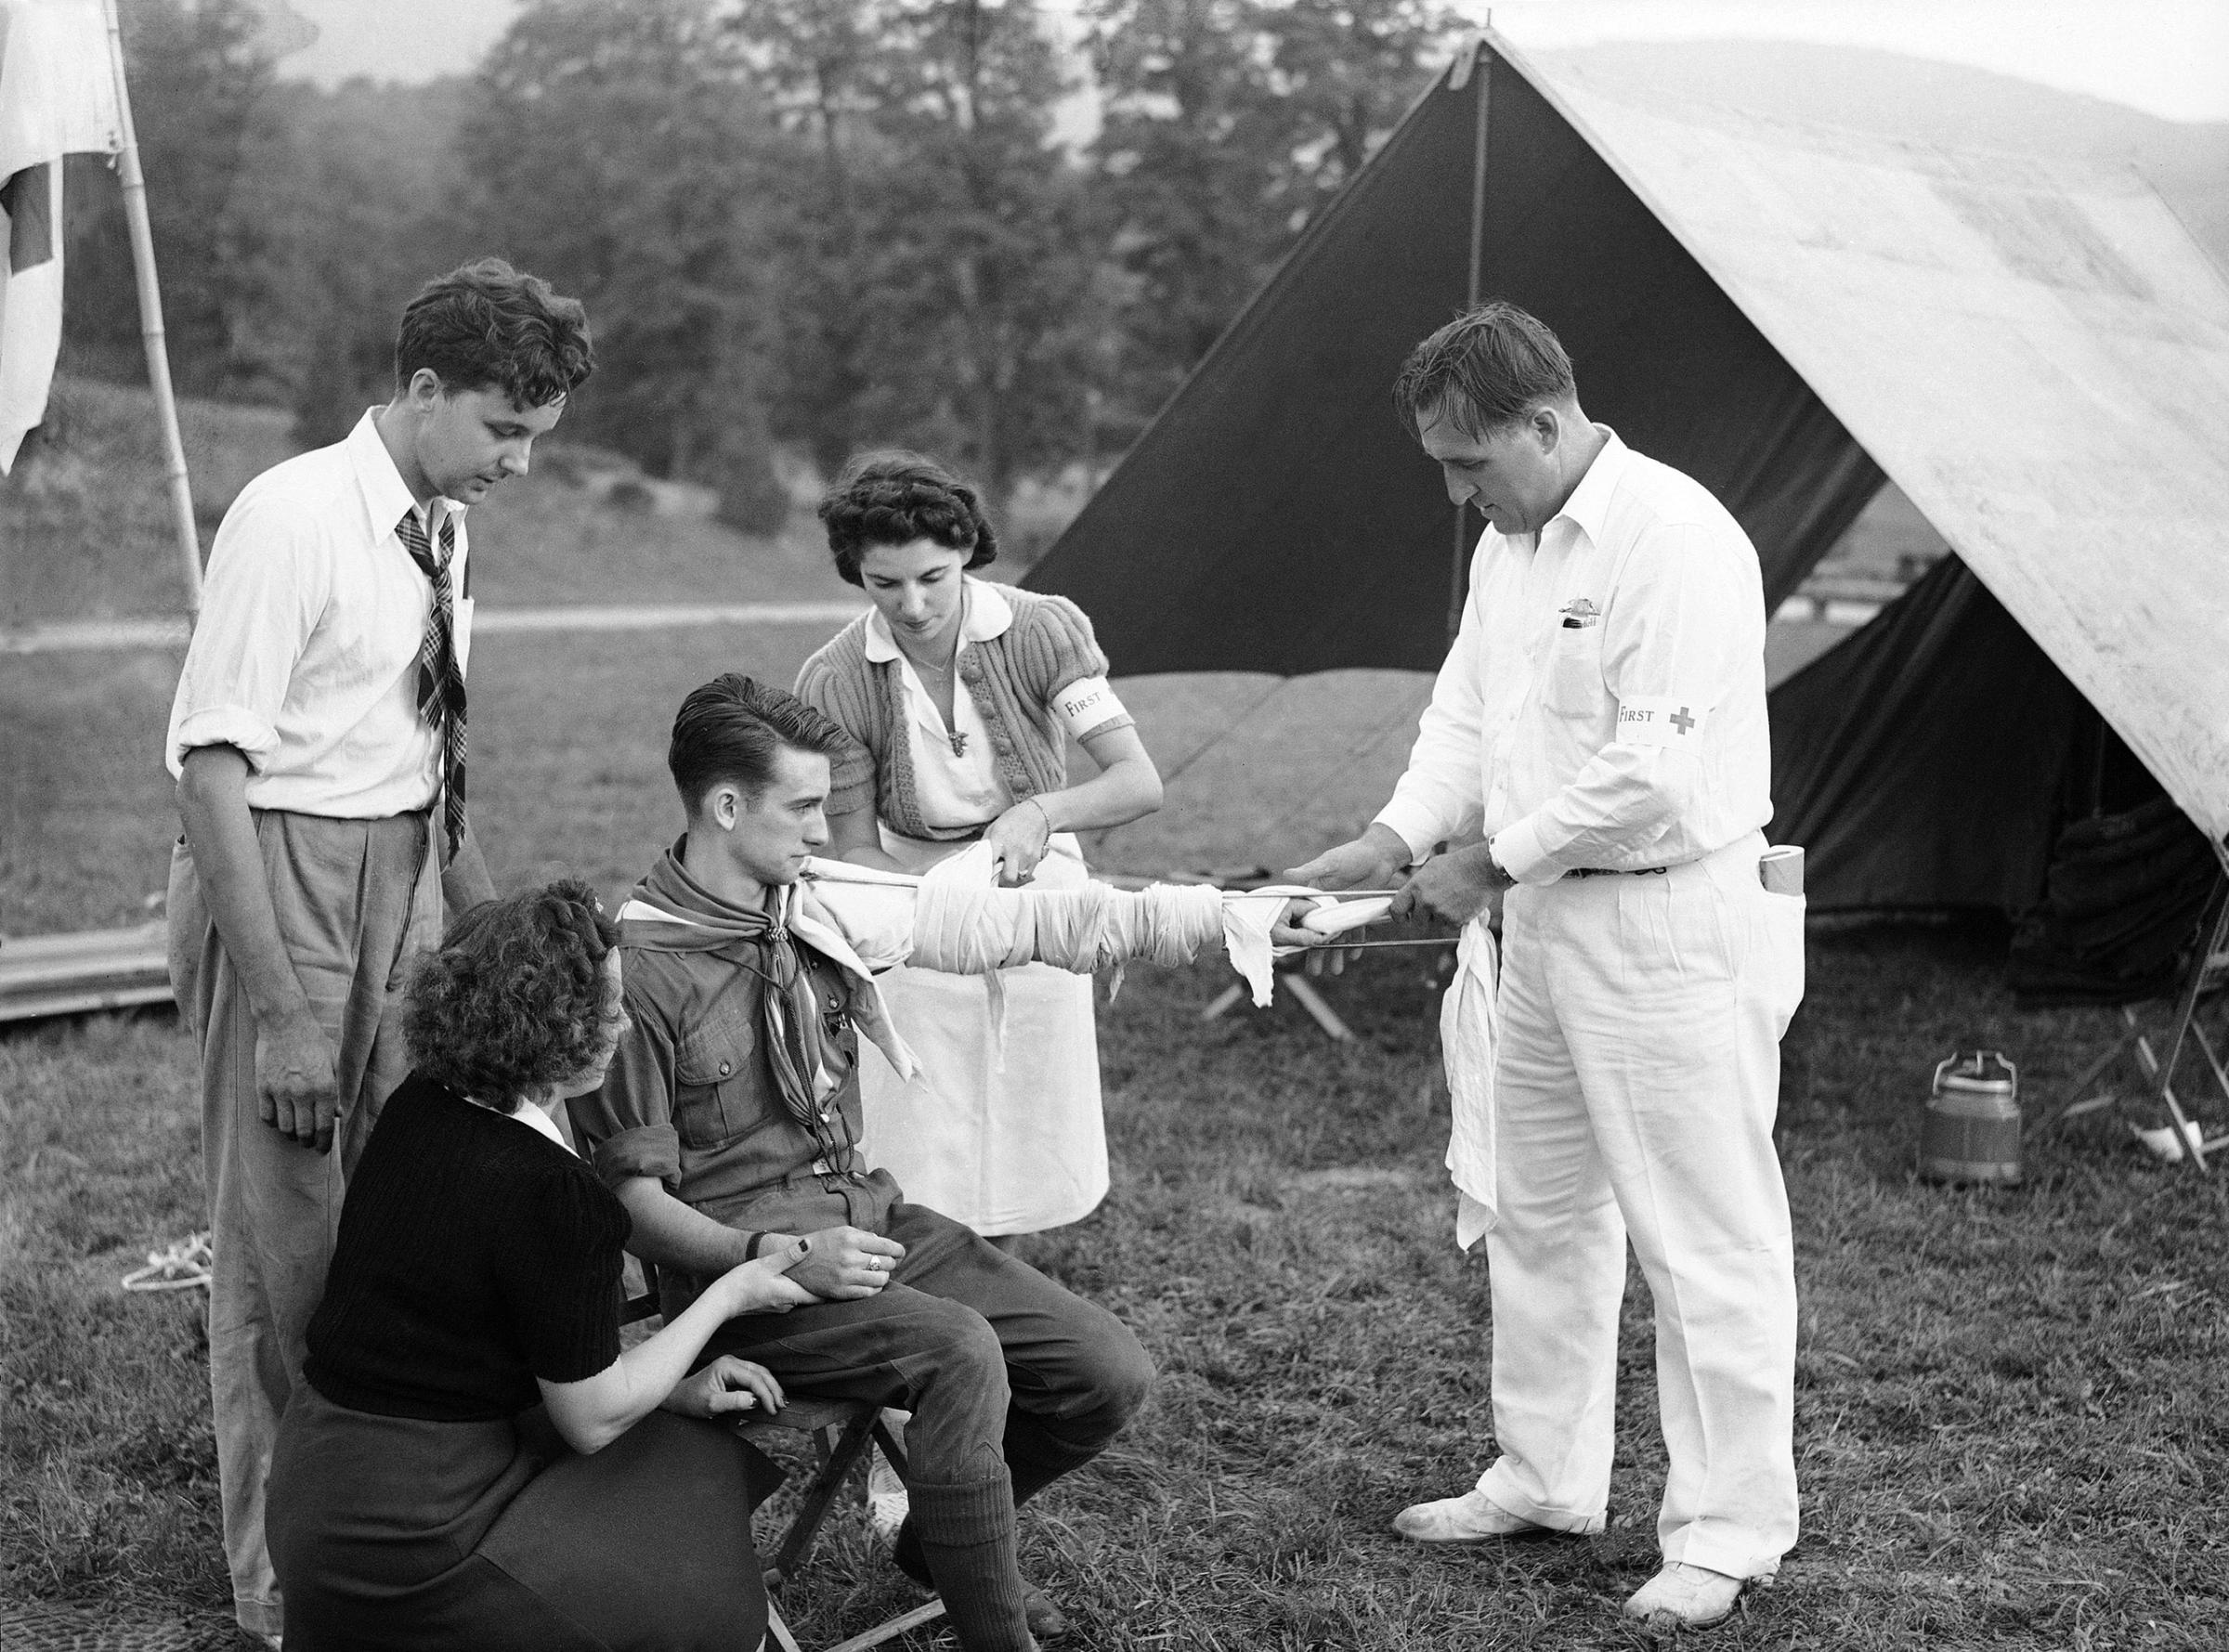 A Boy Scout has his arm tied up in a splint after it has been dressed by Red Cross workers from Poughkeepsie, N.Y., following the "evacuation" of about 2,000 New Yorkers who left for Dutchess County in New York, Sept. 9, 1941. Simulating wartime conditions volunteers left the city and drove north to avoid an imaginary "bombing" of New York. It was part of a demonstration of civilian defense work.